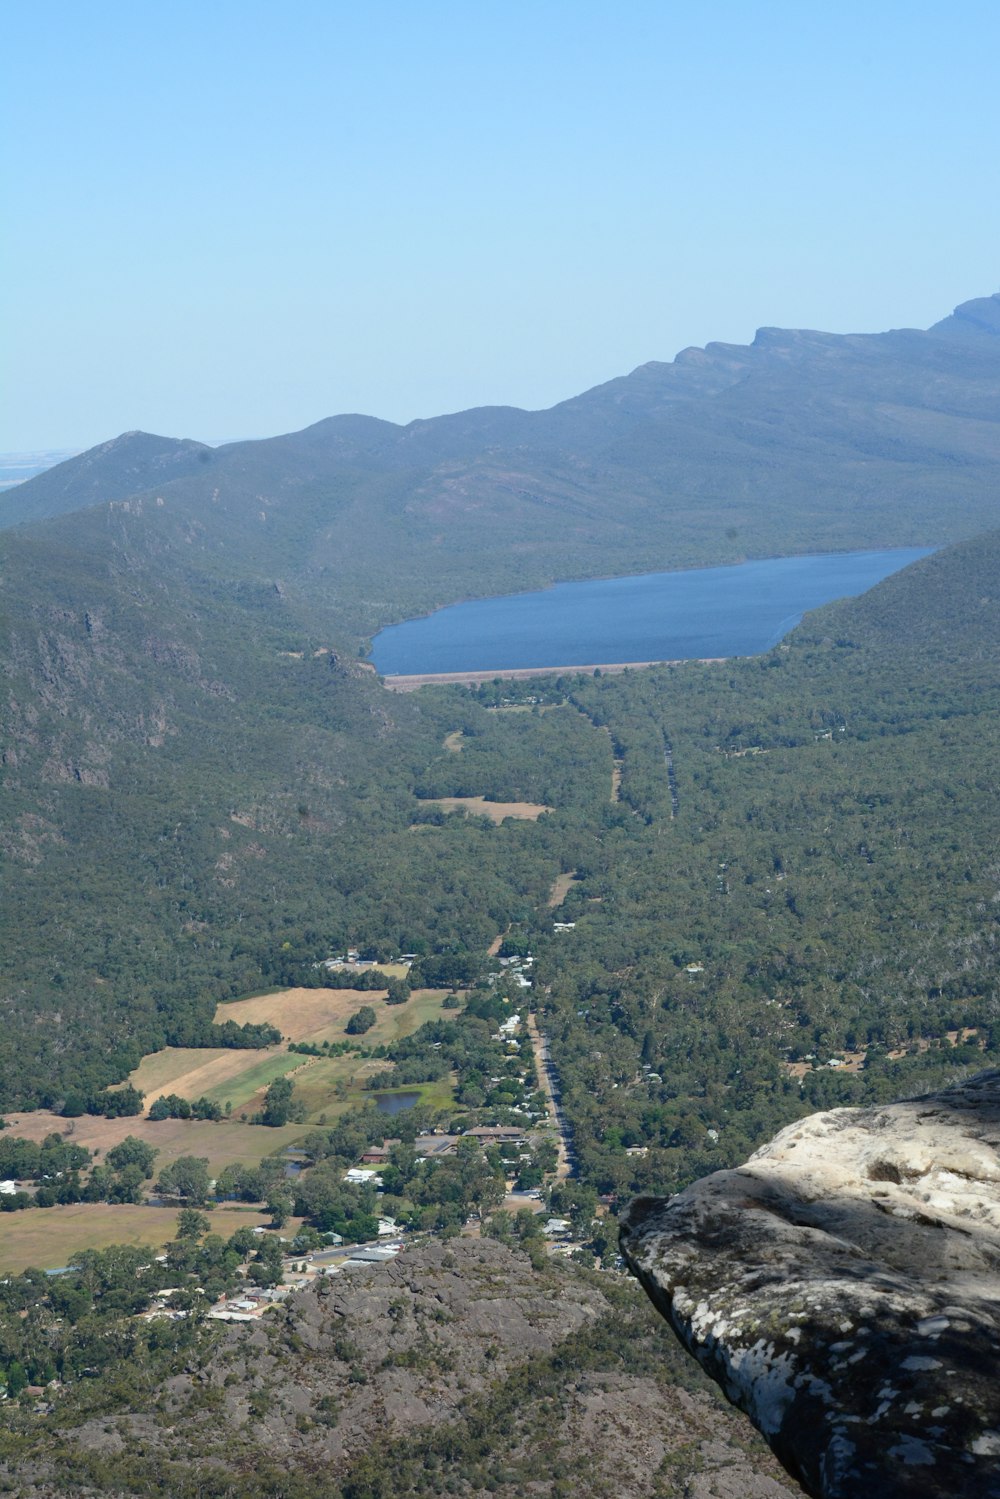 a view of a valley and a lake from a high point of view